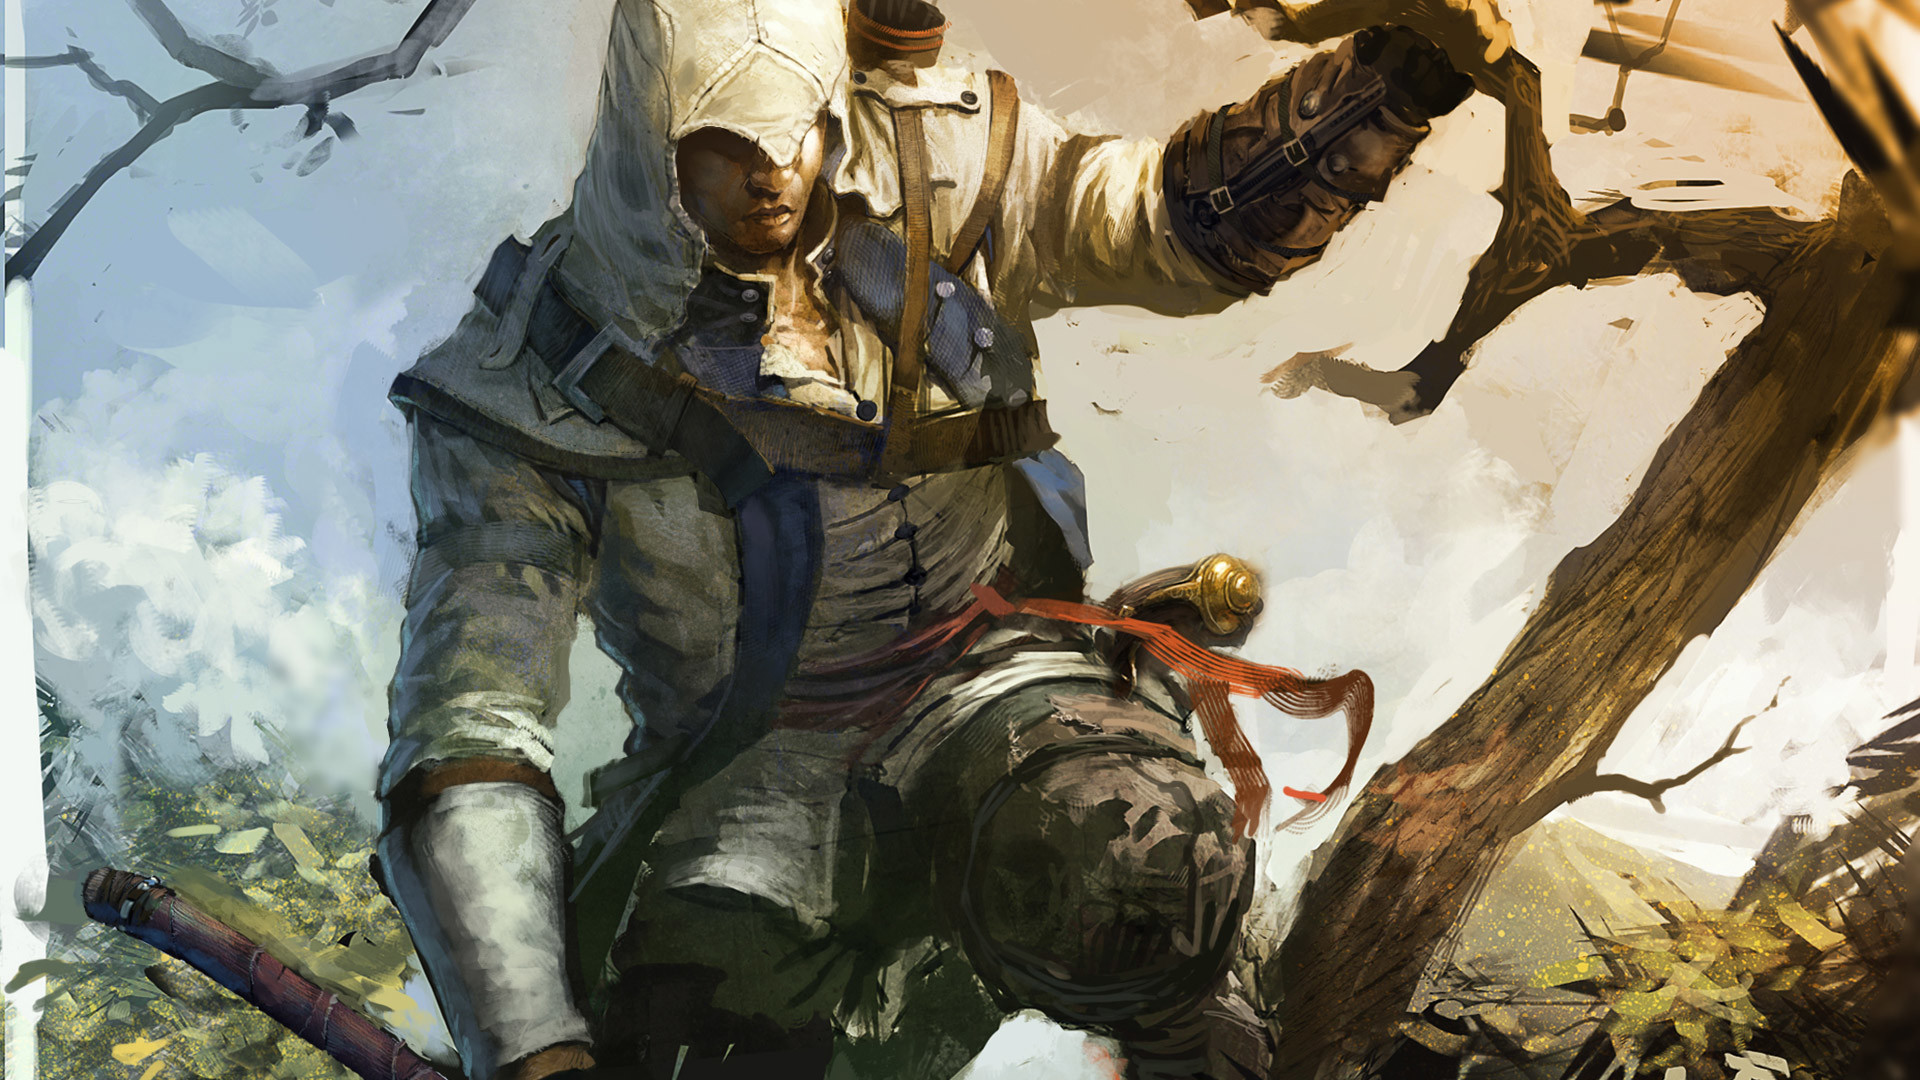 1920x1080 Free Assassin's Creed III Wallpaper in 